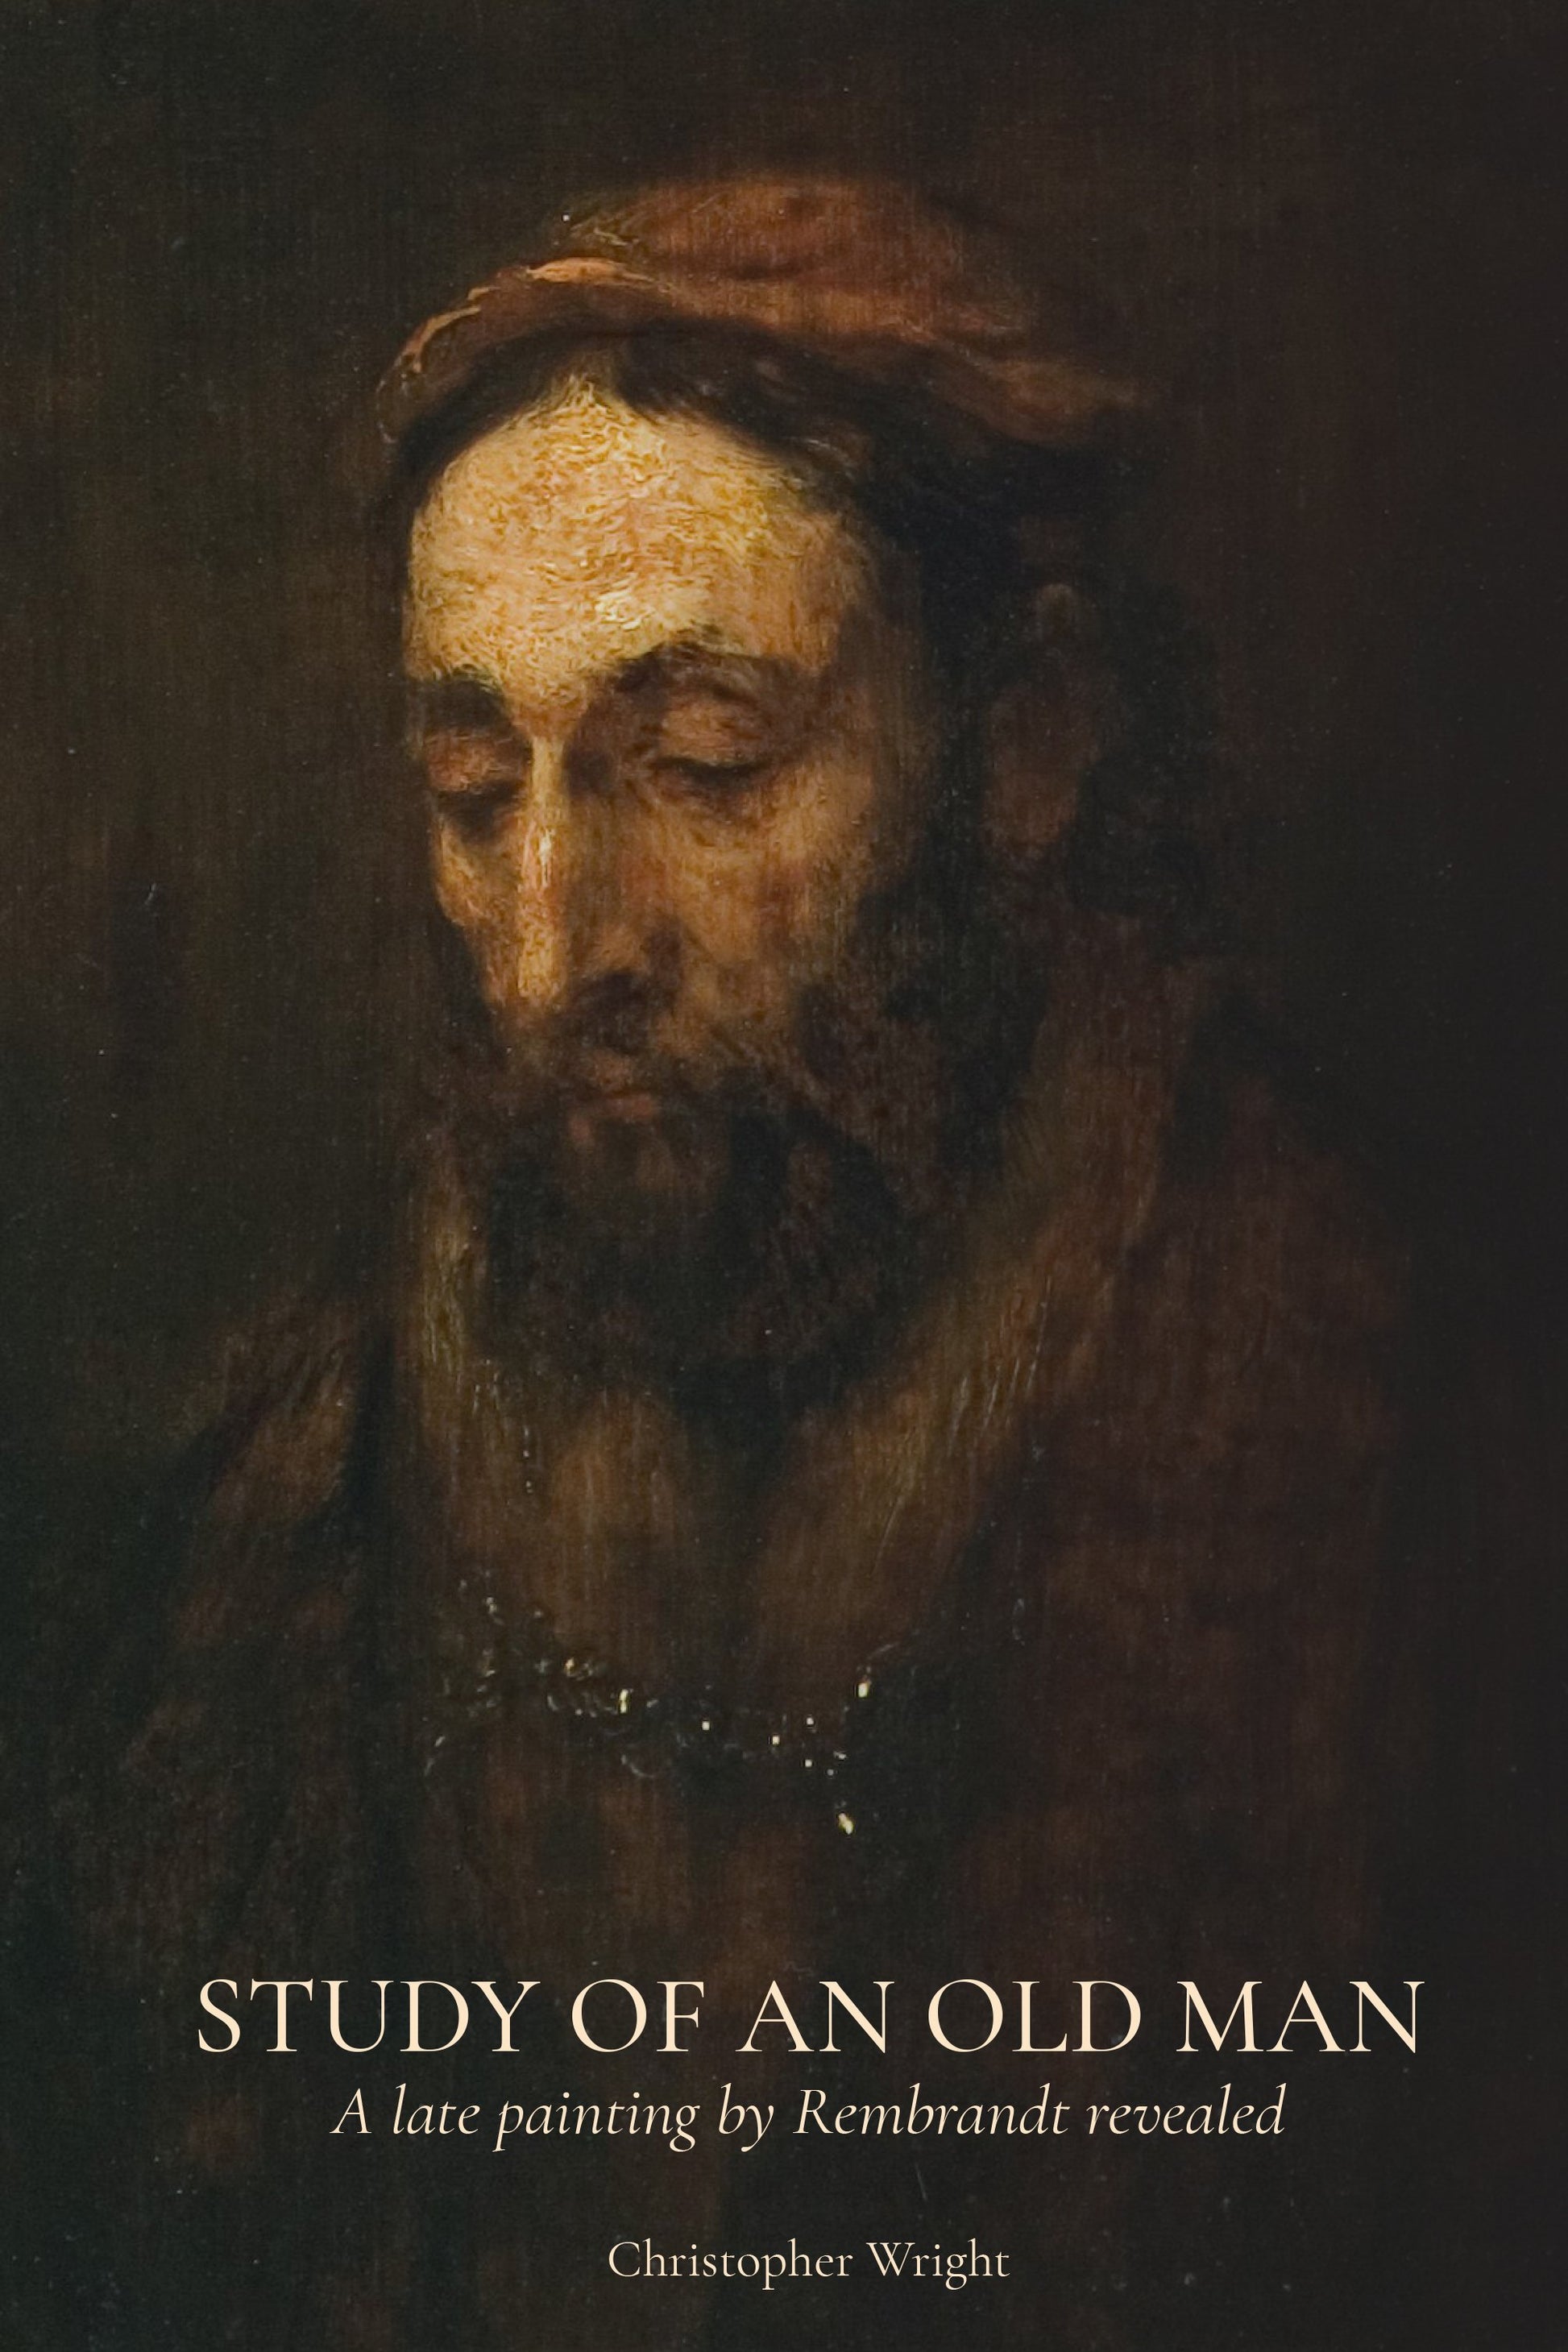 Study Of An Old Man - A Late Painting by Rembrandt Revealed